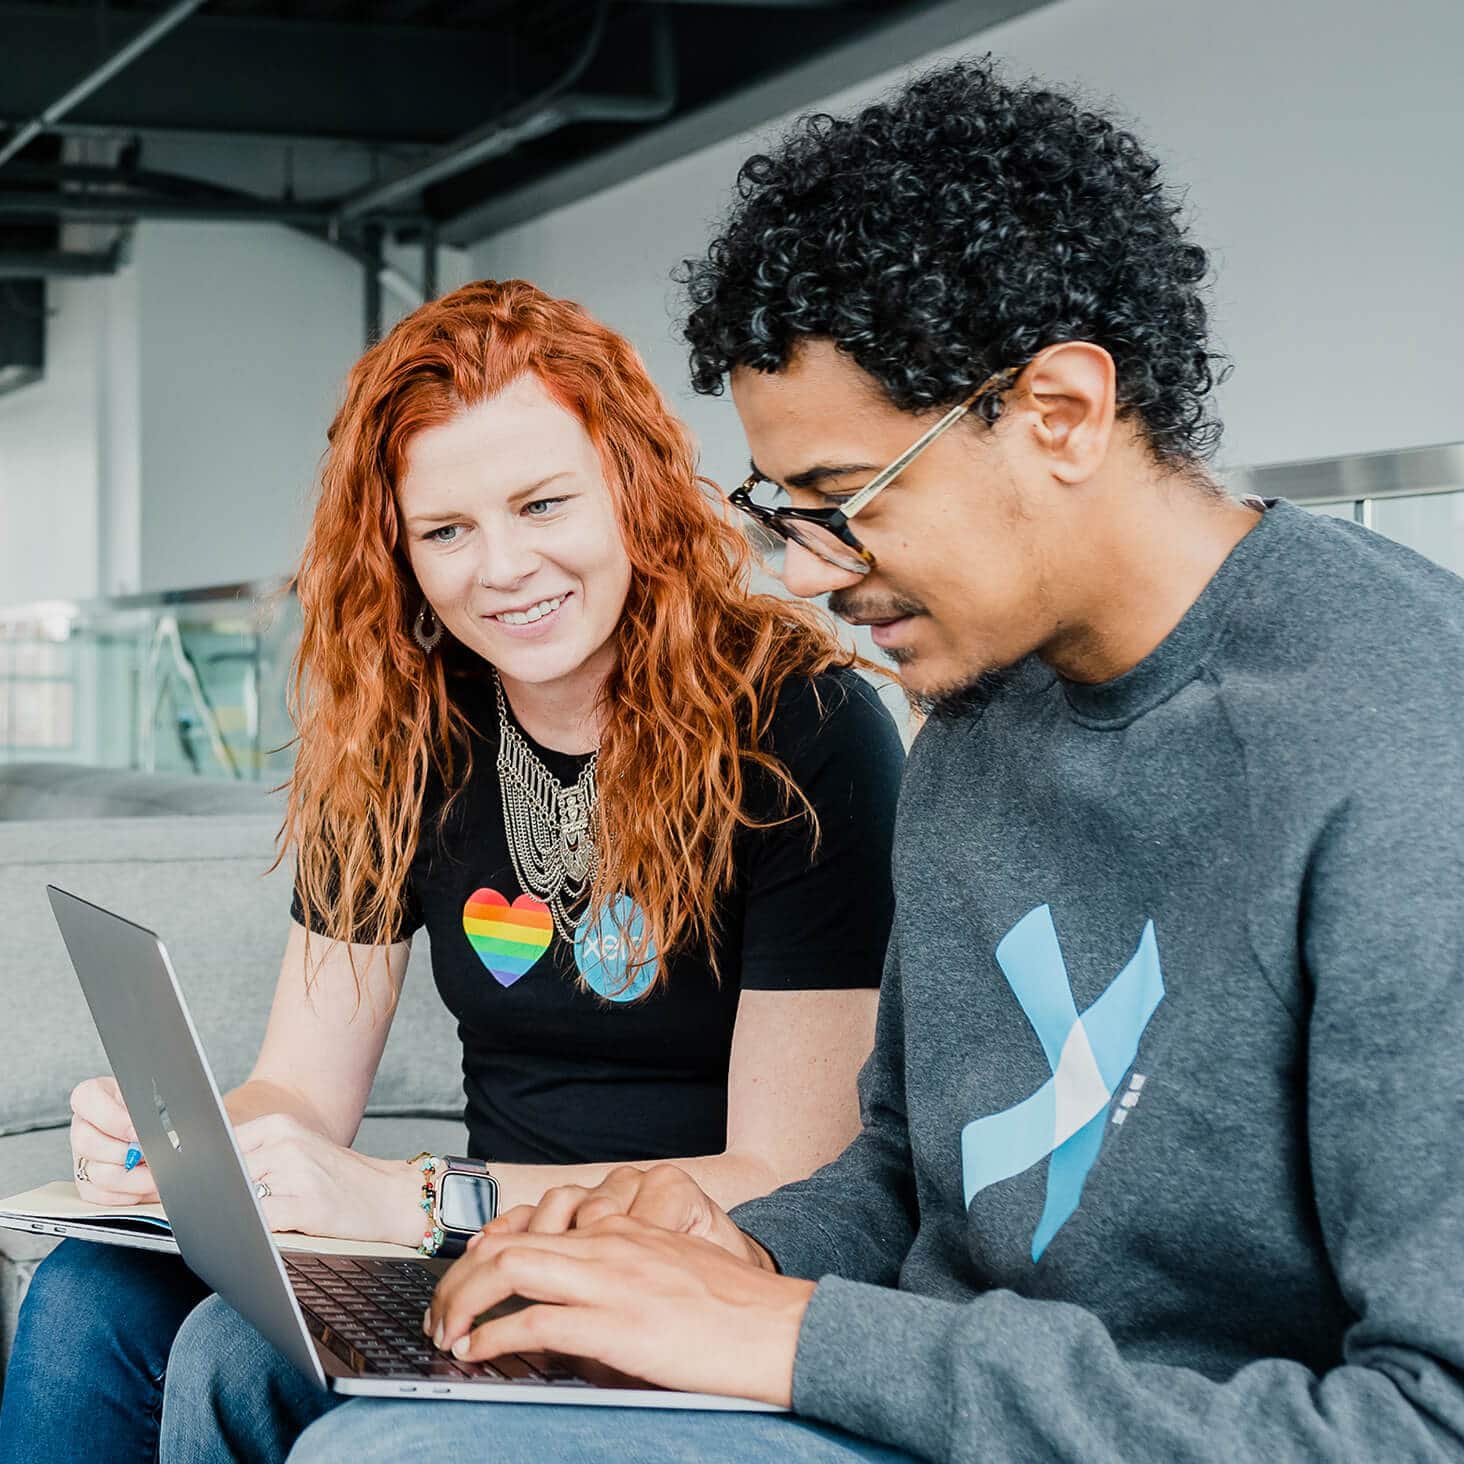 Two Xero employees, both wearing staff tee shirts, work together on a laptop